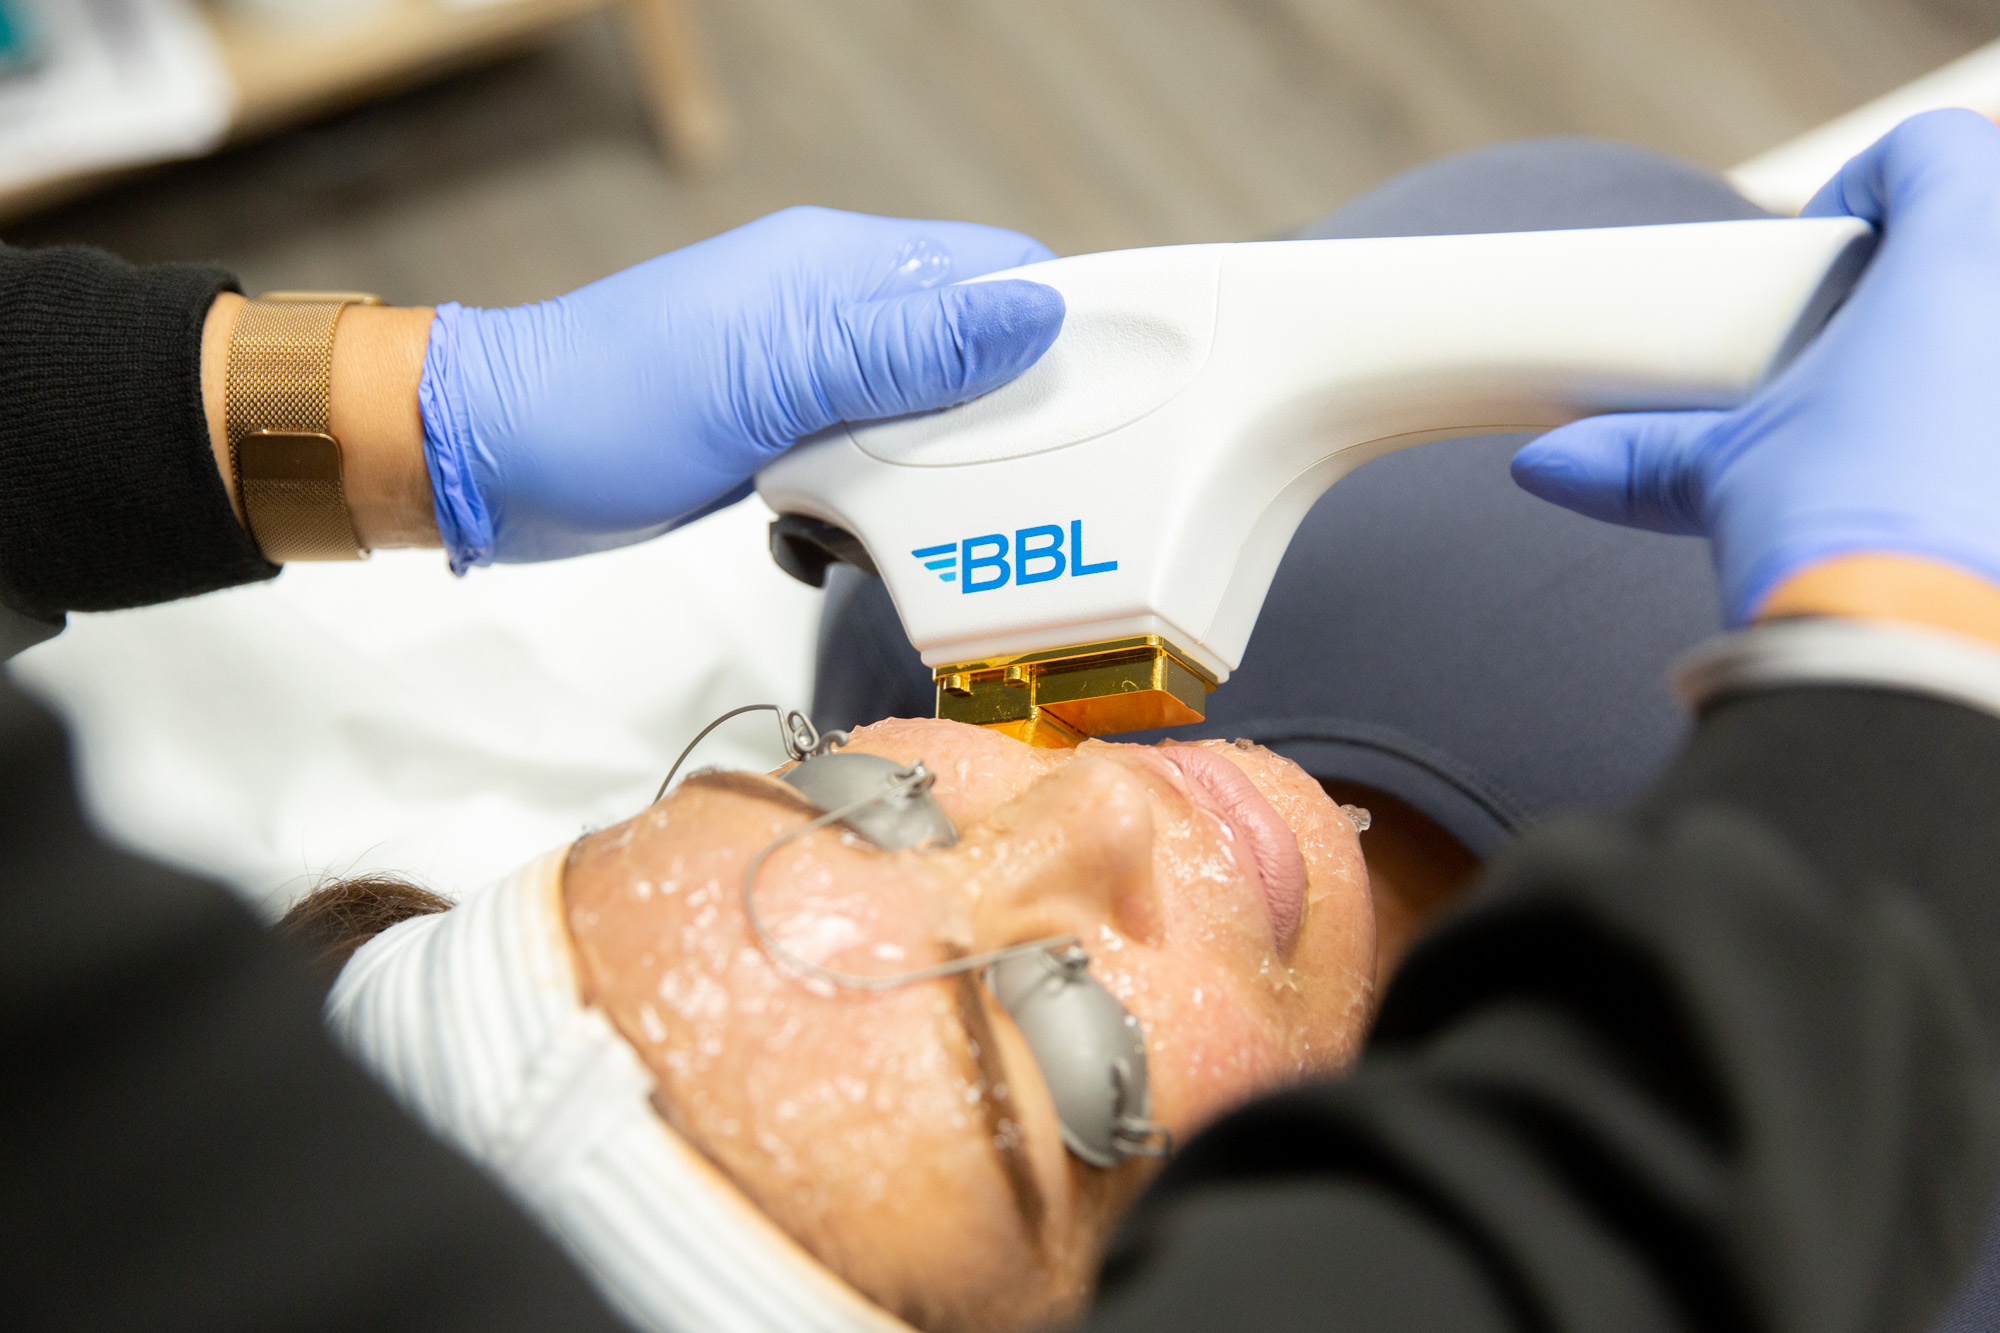 Close up taken from above of BBL Hero machine being applied to female client's jawline.